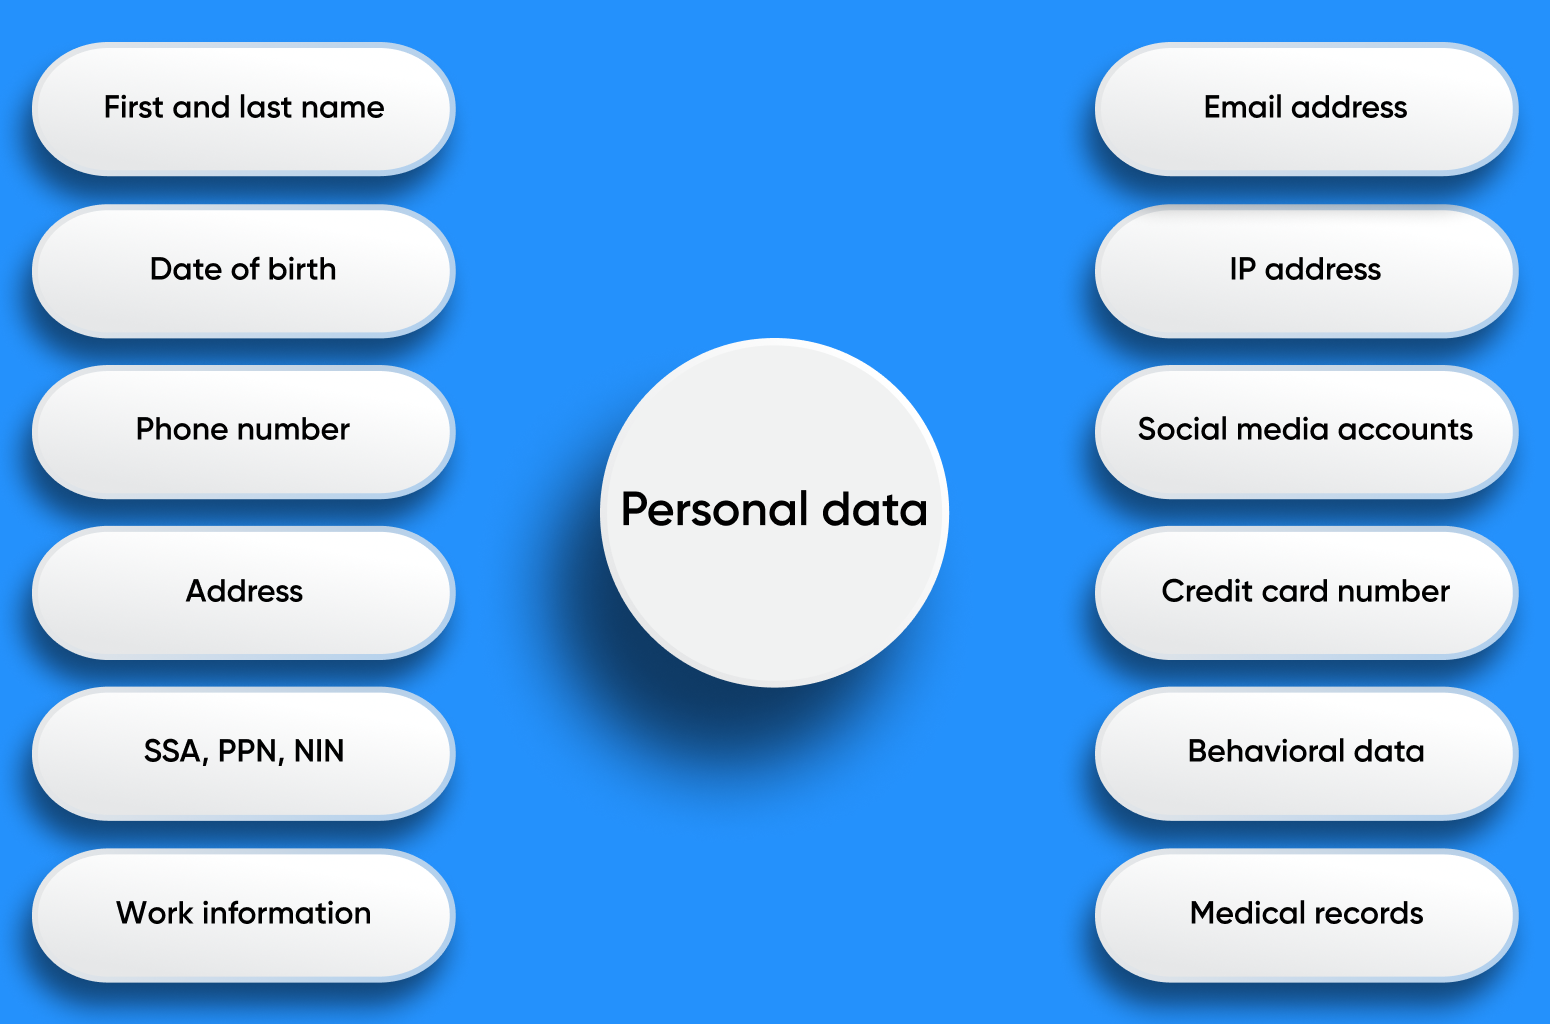 Examples of personal data